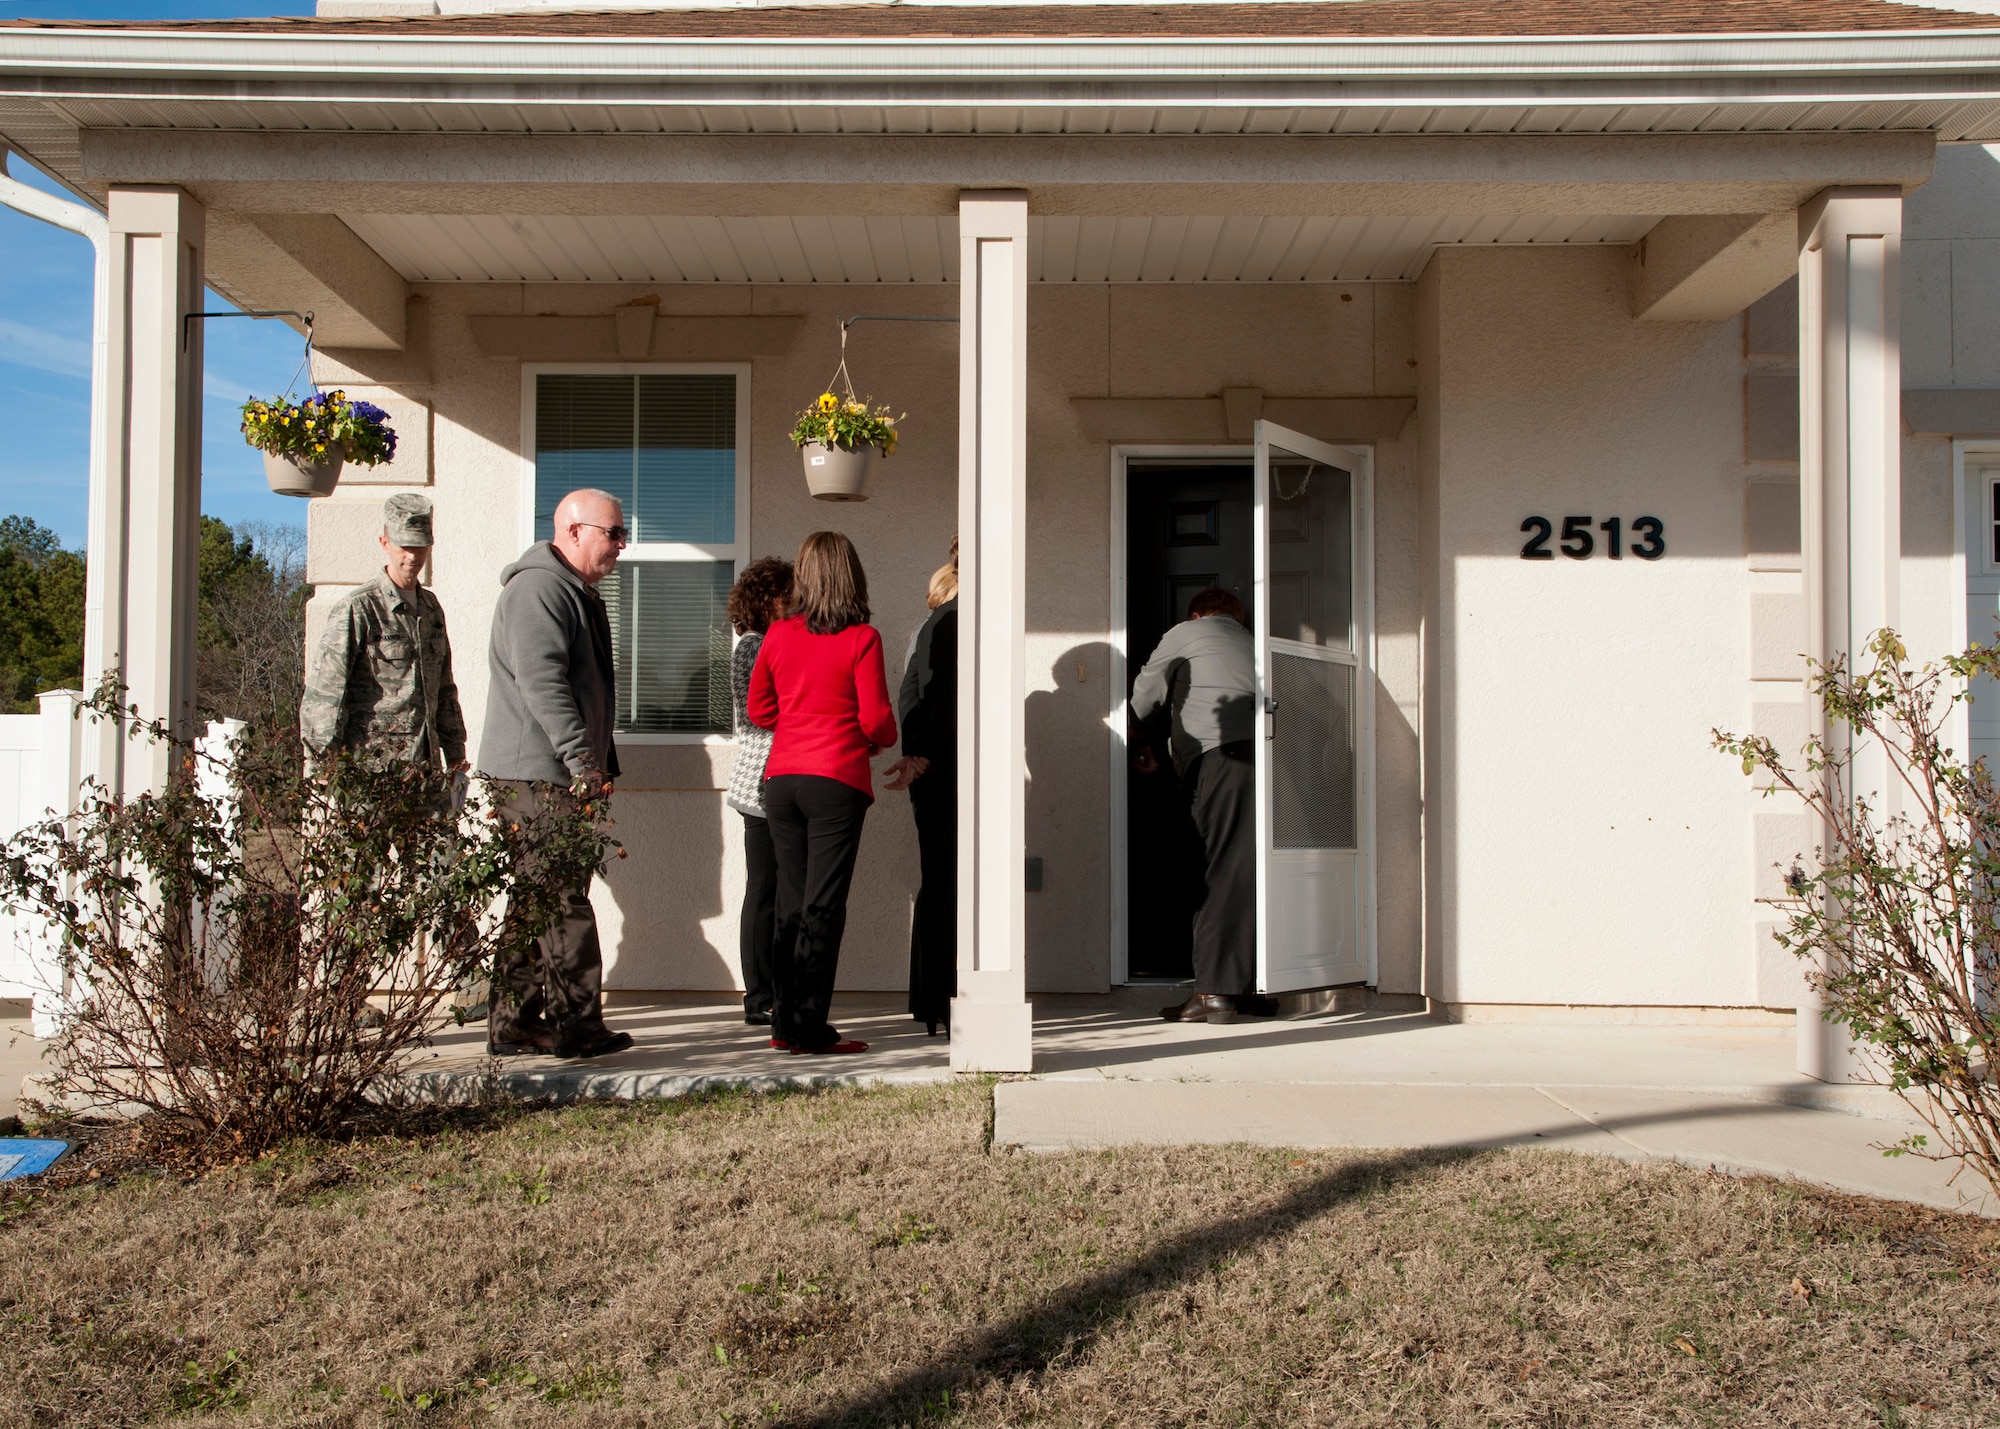 Base leadership spouses tour a home located in the Eastside Family Housing community during a tour of Barksdale Air Force Base, La., Dec. 16, 2014. The spouses toured the model home to have a better understanding of on-base housing. (U.S. Air Force photo/Senior Airman Joseph A. Pagán Jr.)